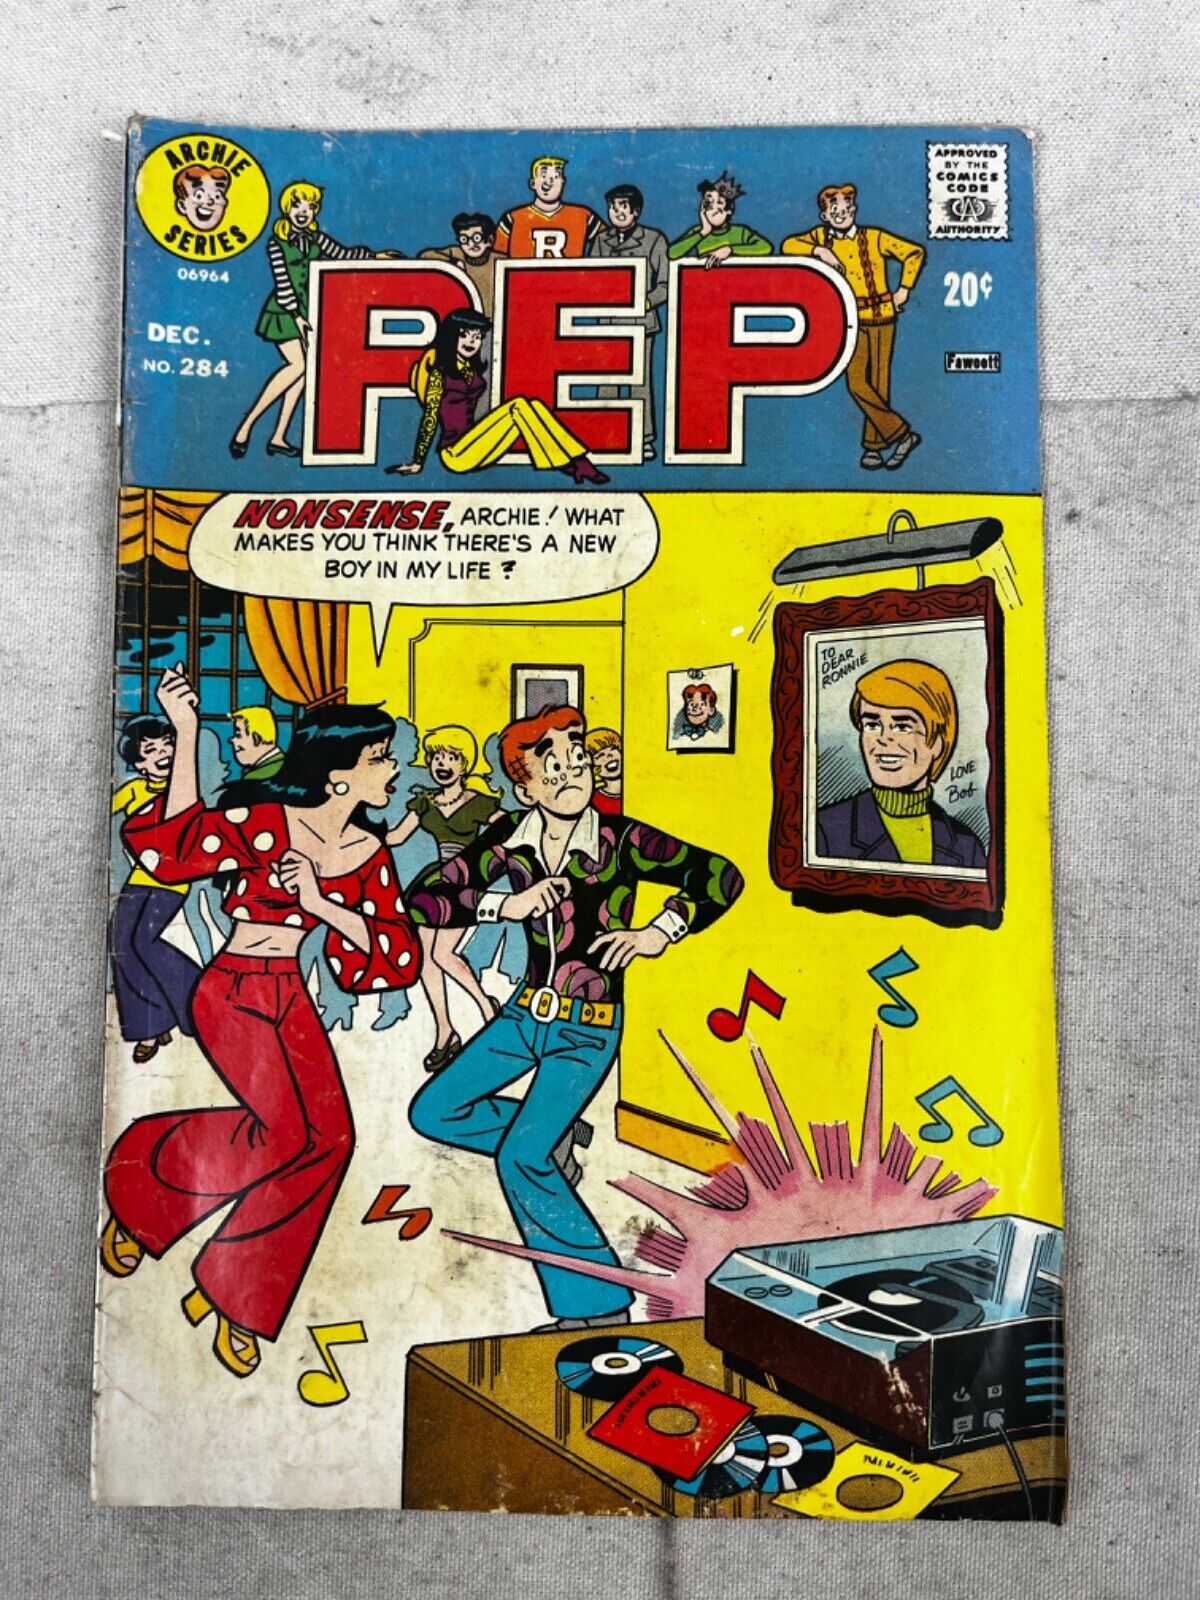 Vintage Collectible Archie Series Pep Comics #284 Pre-Owned